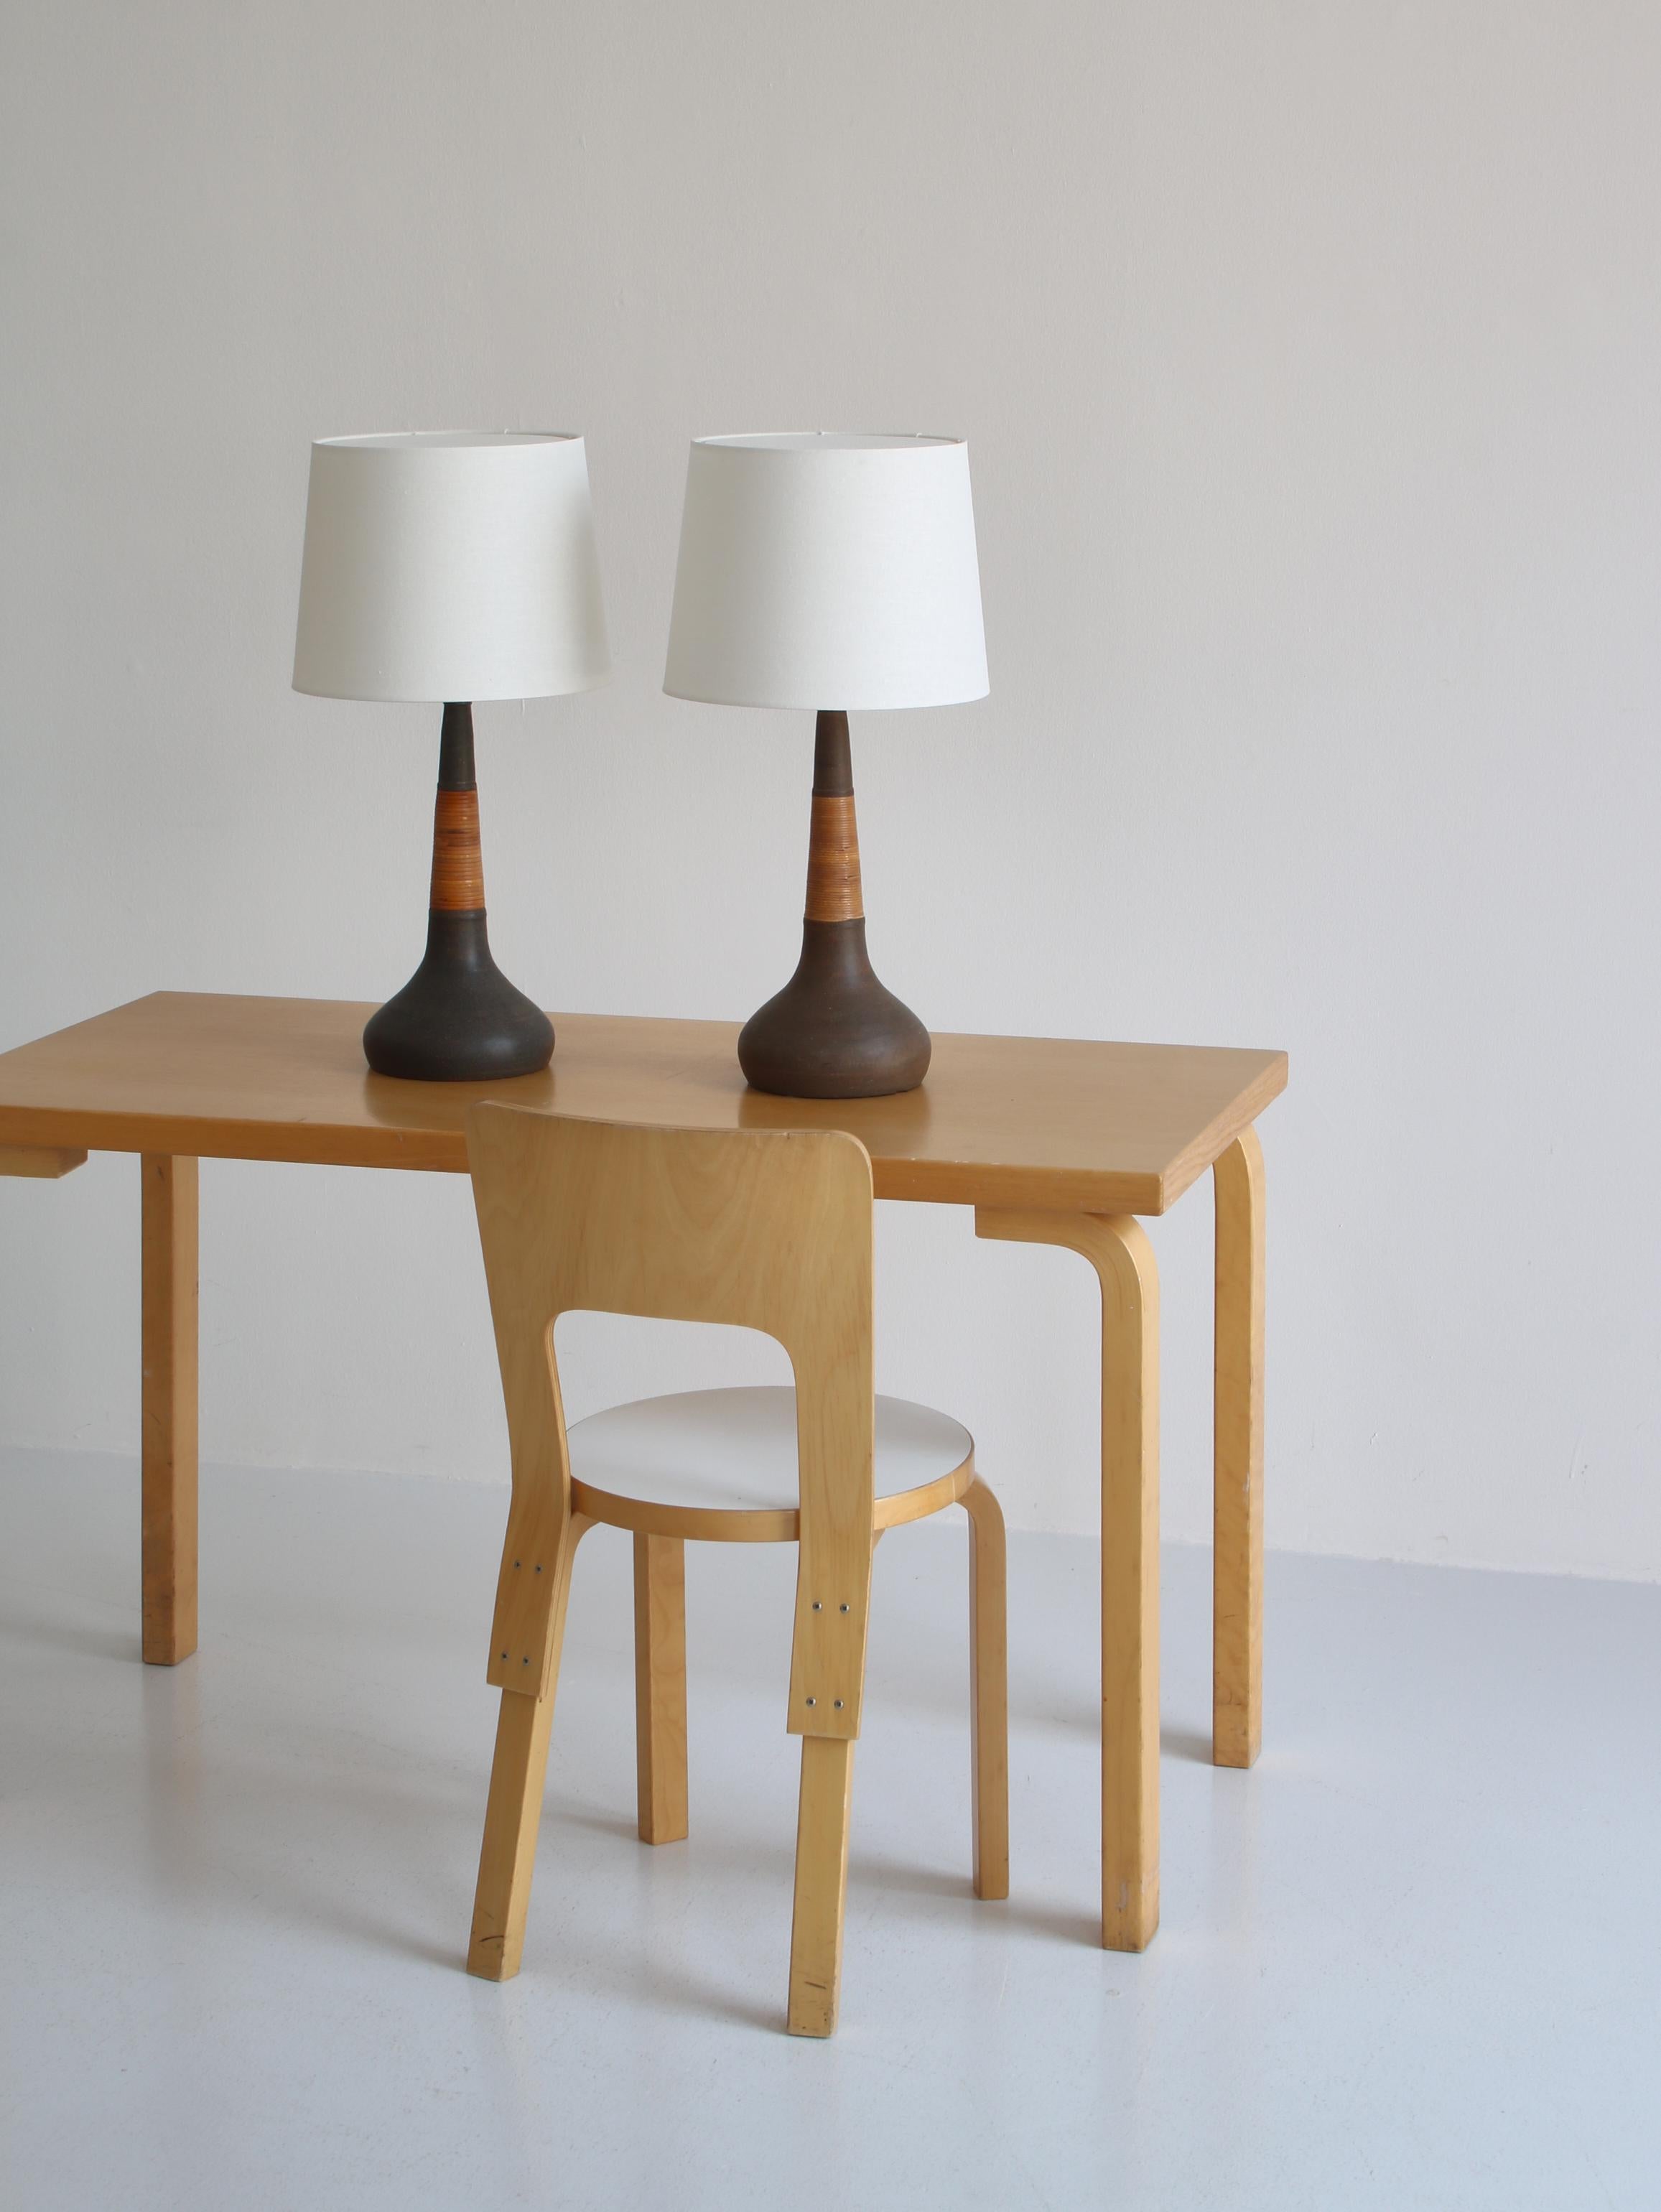 Beautiful and rare table lamps designed by Esben Klint for 